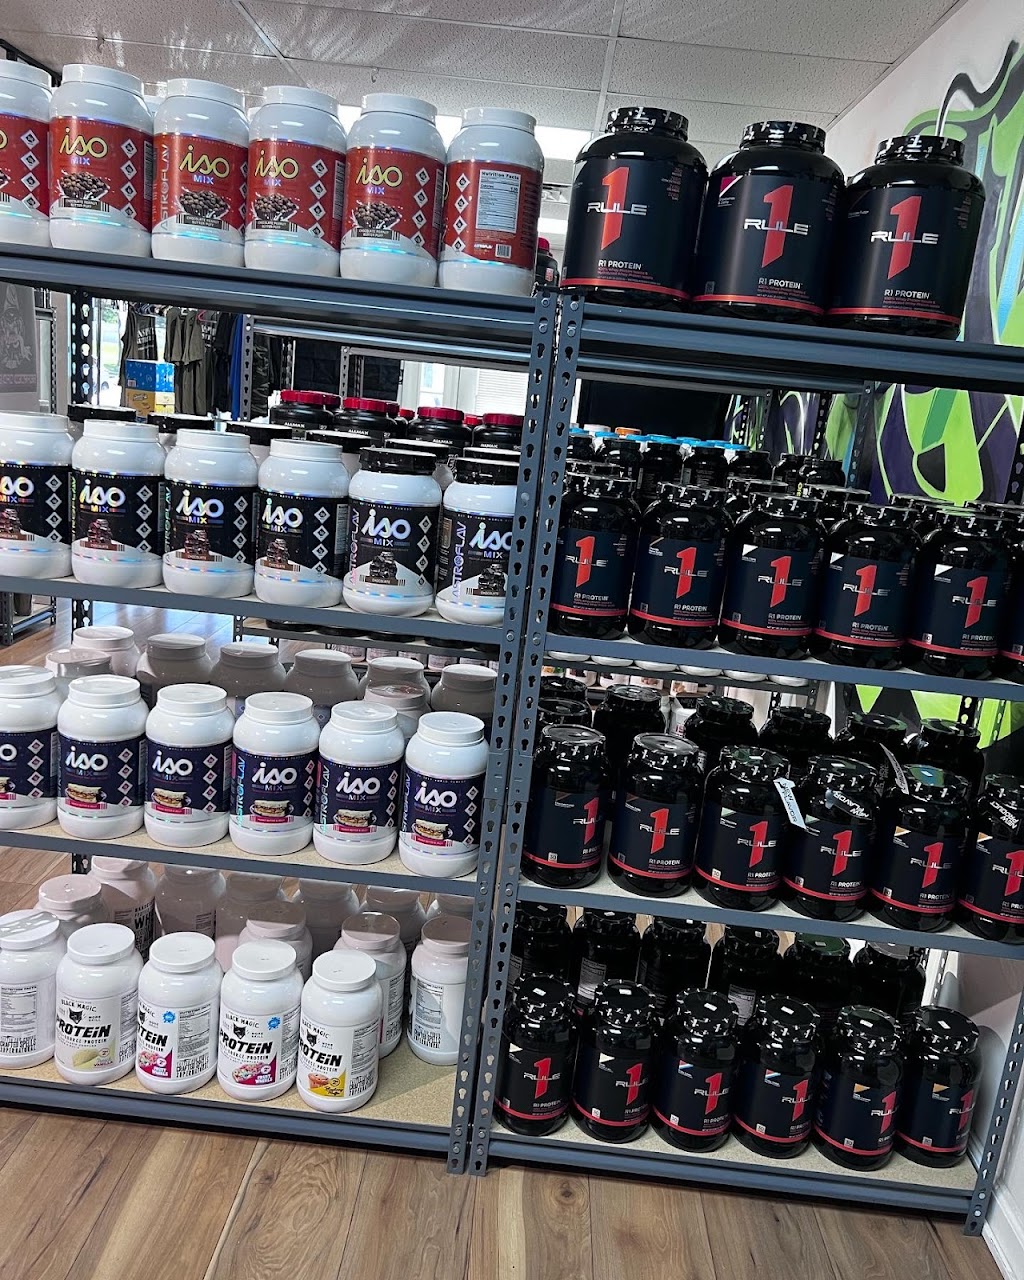 Inspyr Nutrition | 7 Wrightstown Cookstown Rd Unit 2, Cookstown, NJ 08511 | Phone: (267) 972-1254